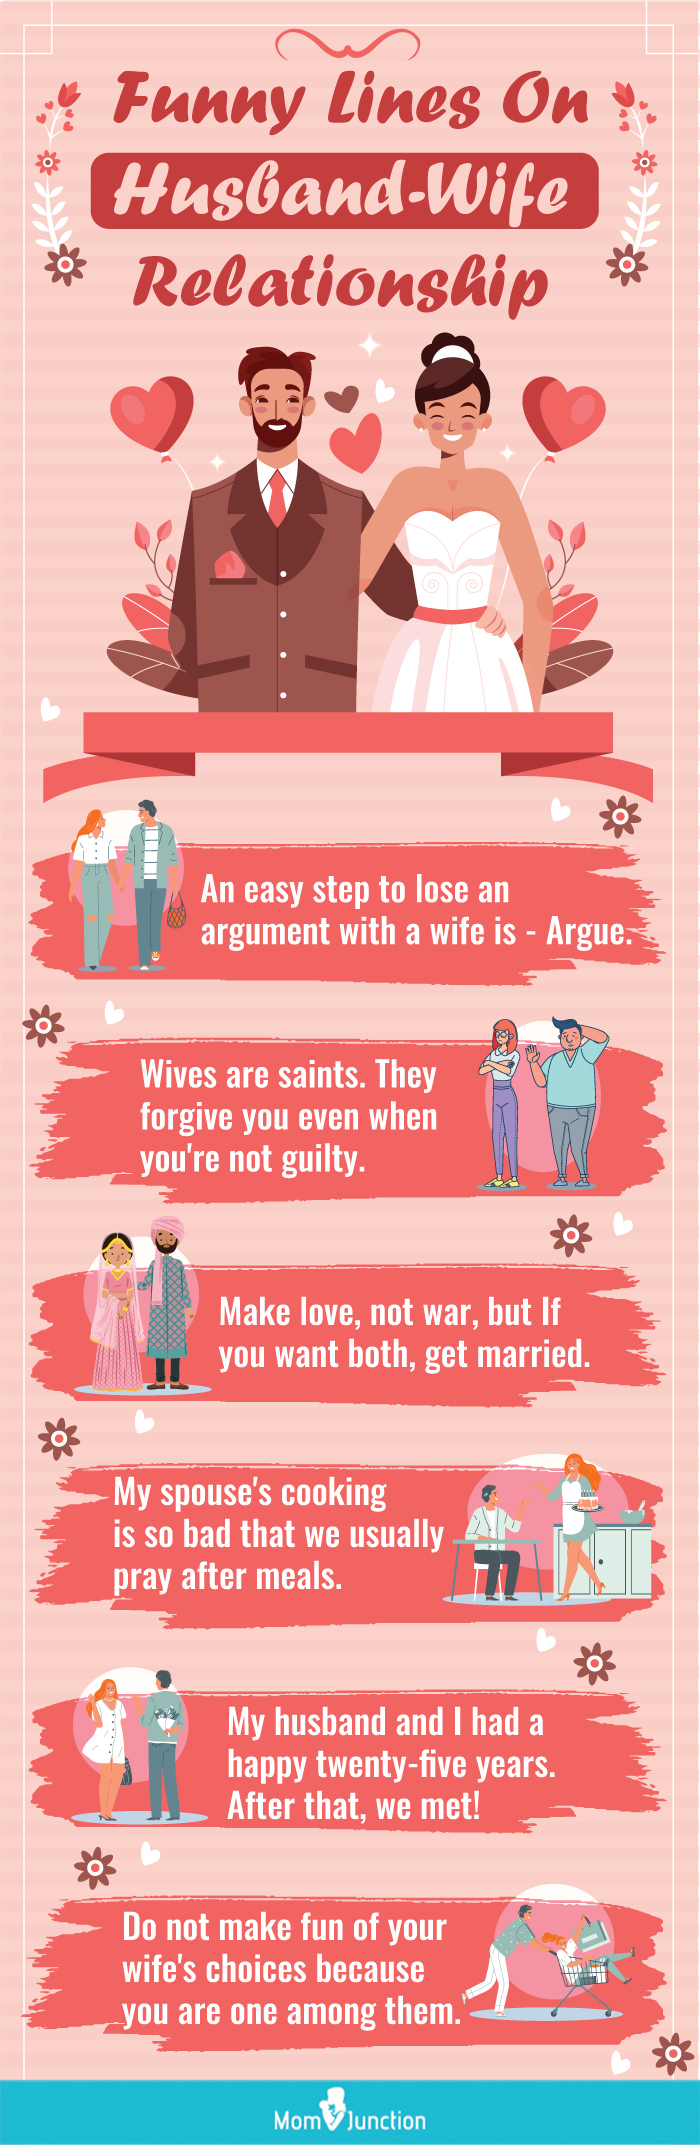 funny lines on husband wife relationship (infographic)